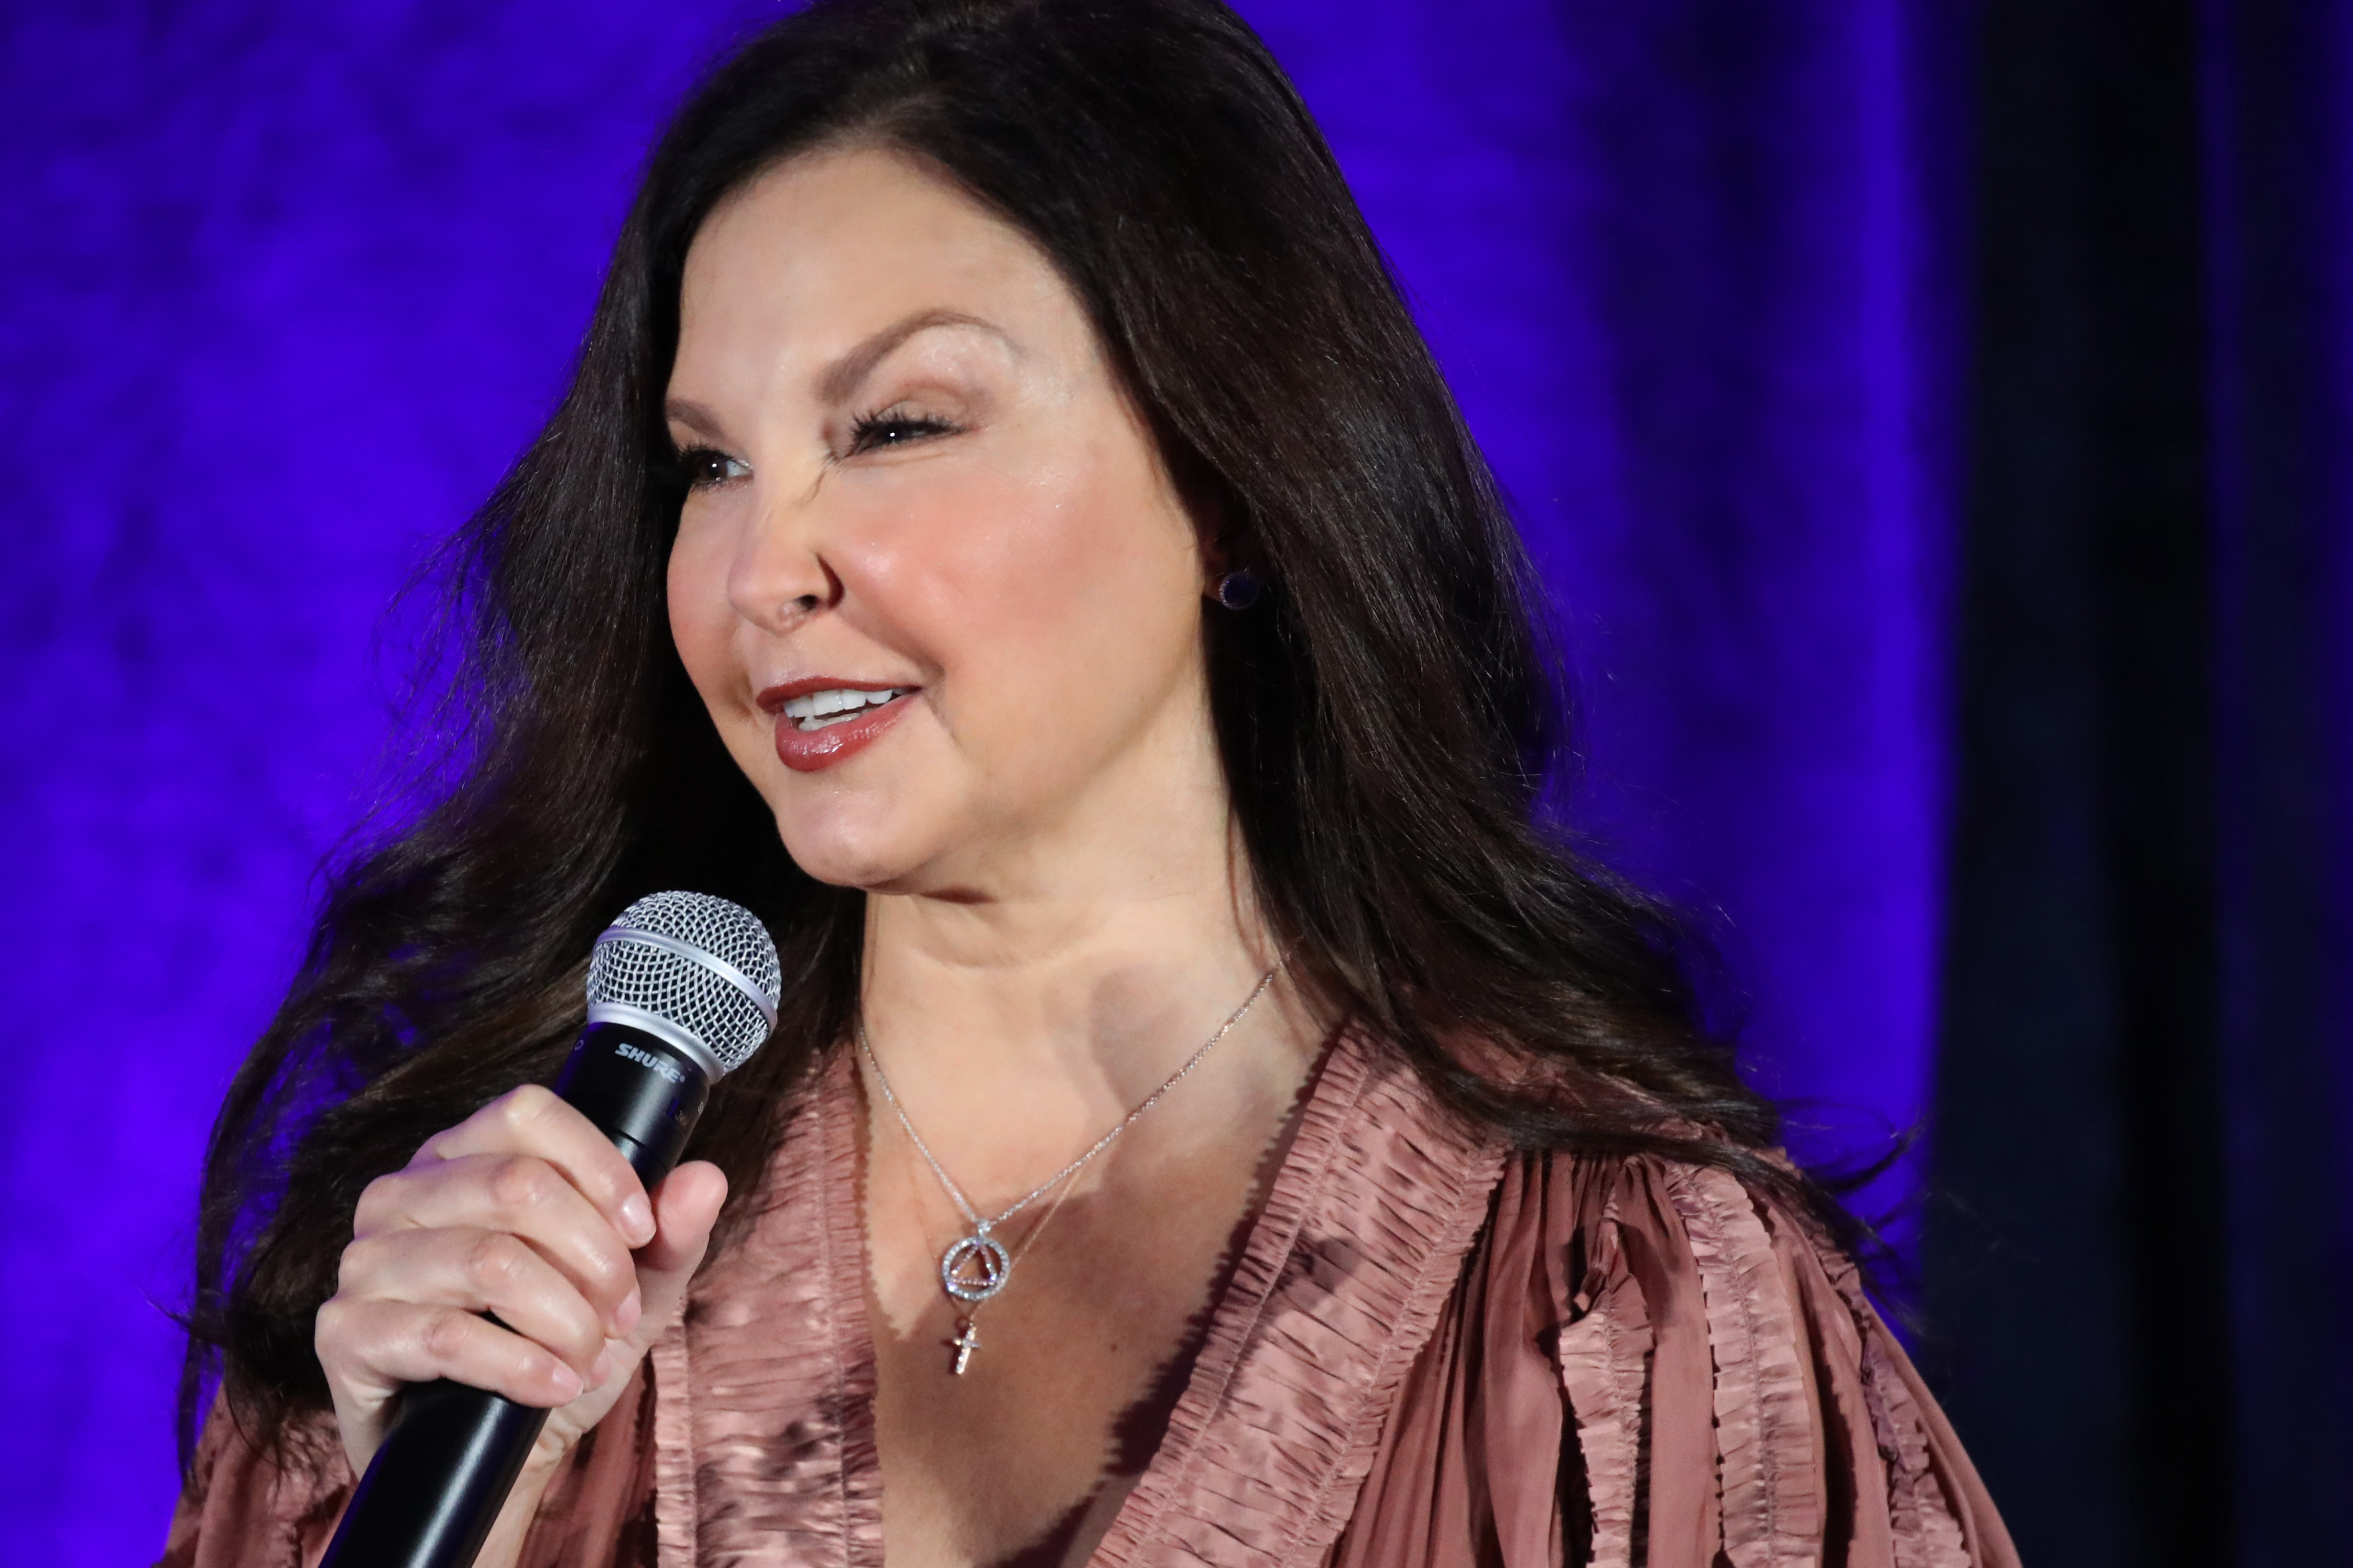 Ashley Judd in New York City on September 20, 2022 | Source: Getty Images